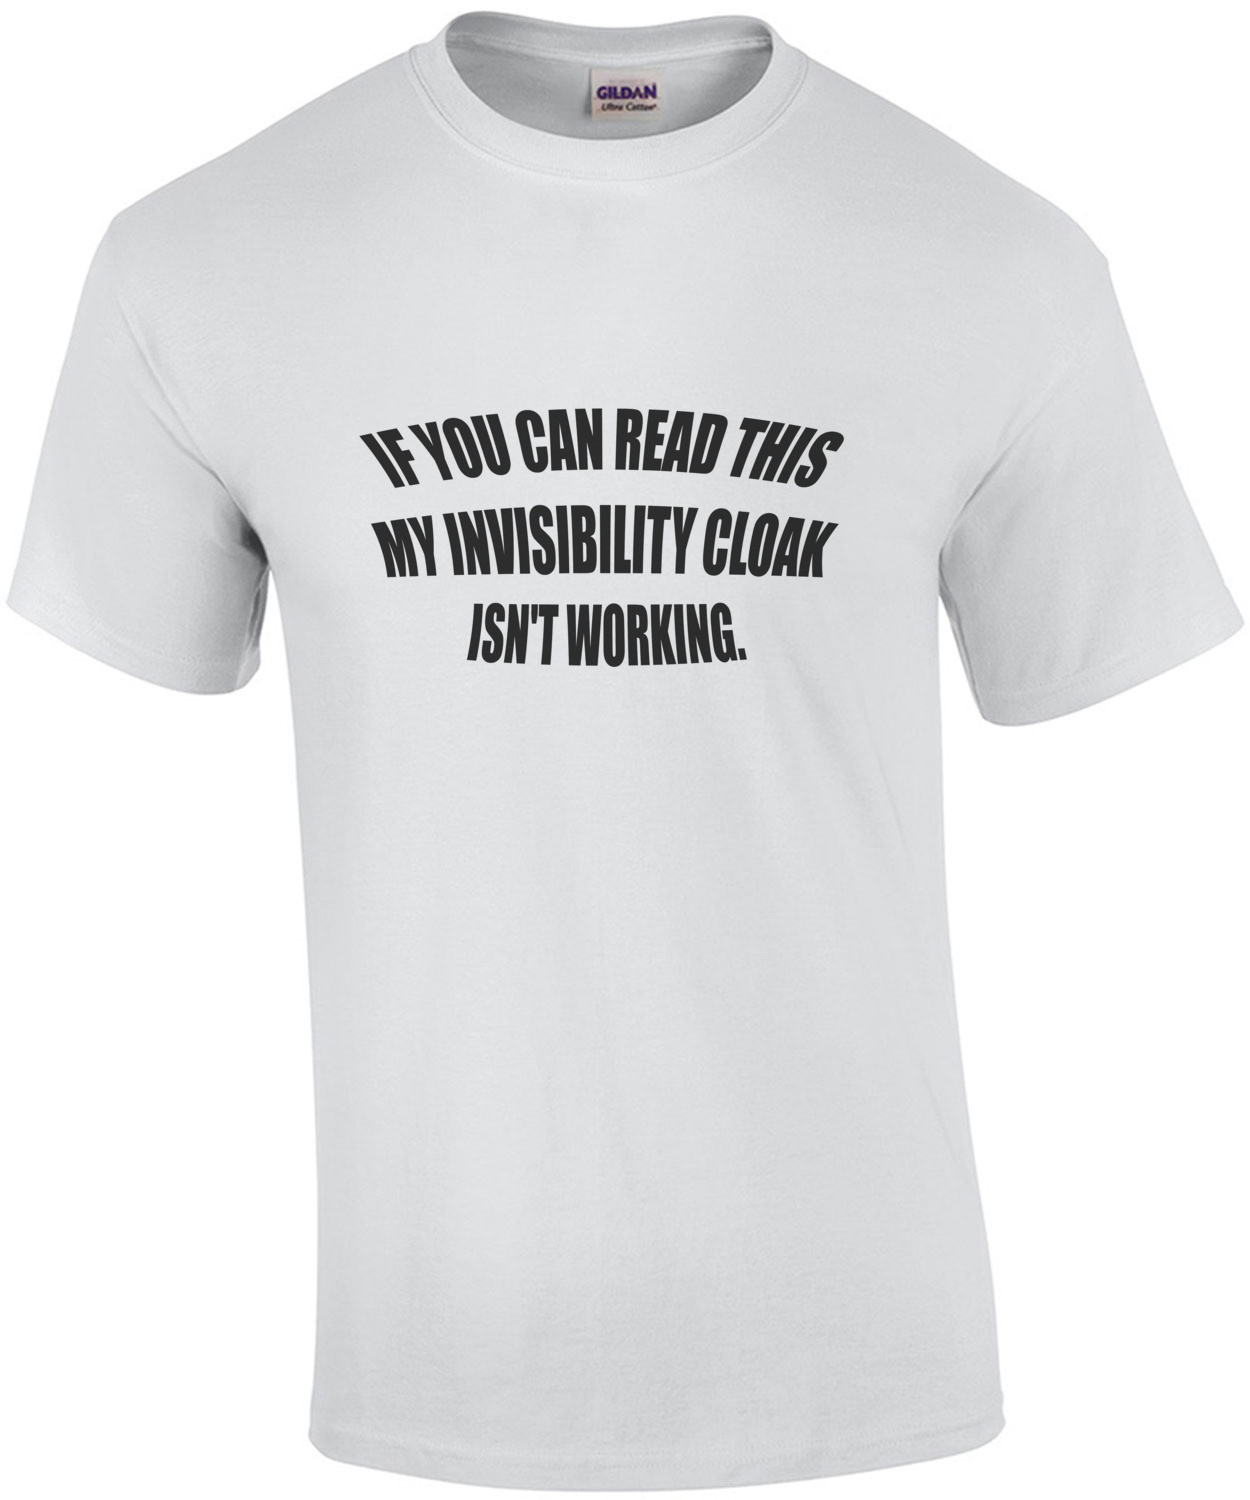 IF YOU CAN READ THIS MY INVISIBILITY CLOAK ISN'T WORKING. Shirt